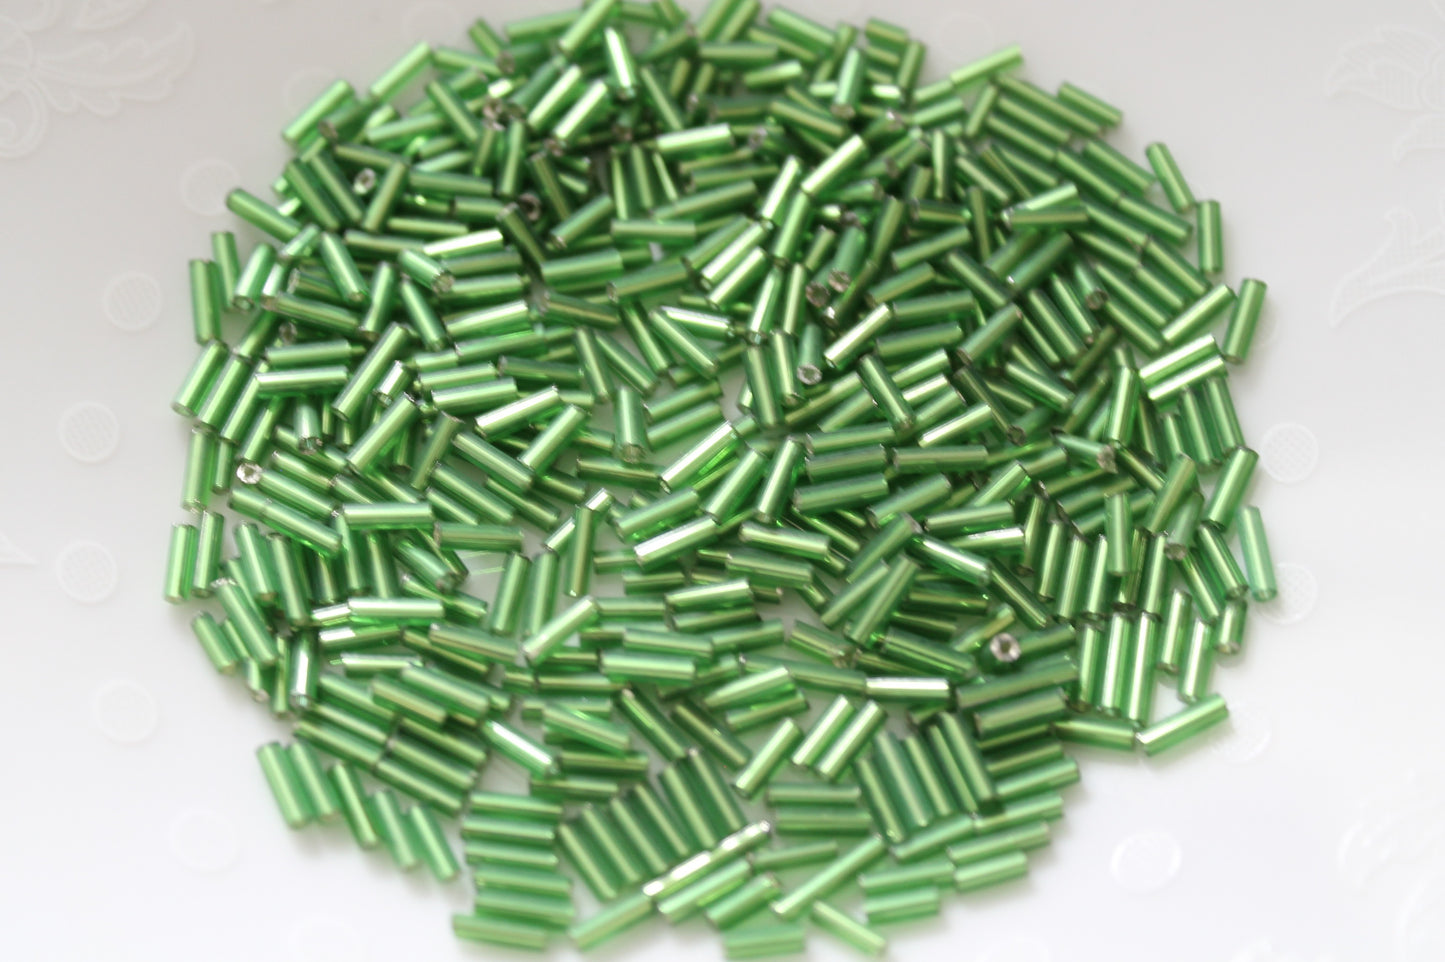 15g Silver Lined Green Bugle Beads